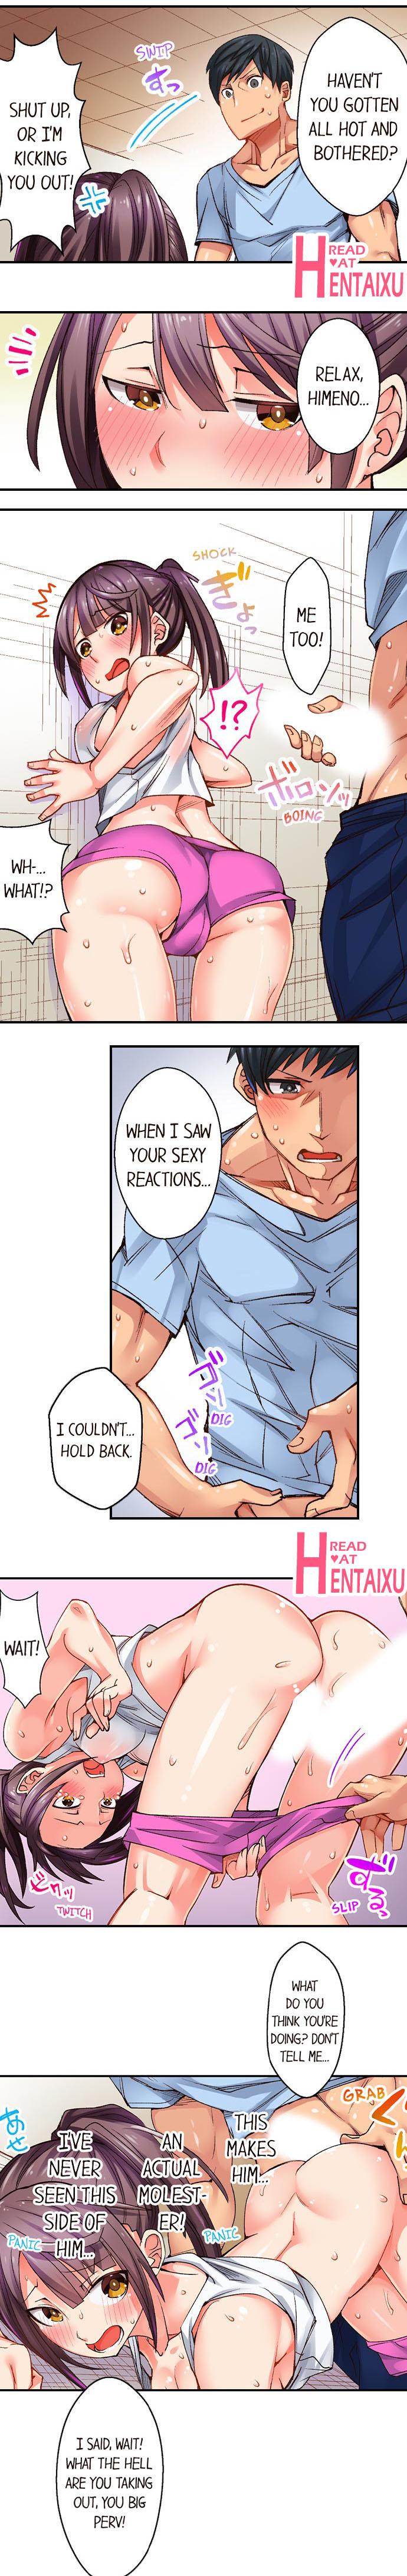 You Cum, You Lose! Wrestling with a Pervert Ch.3/? 26